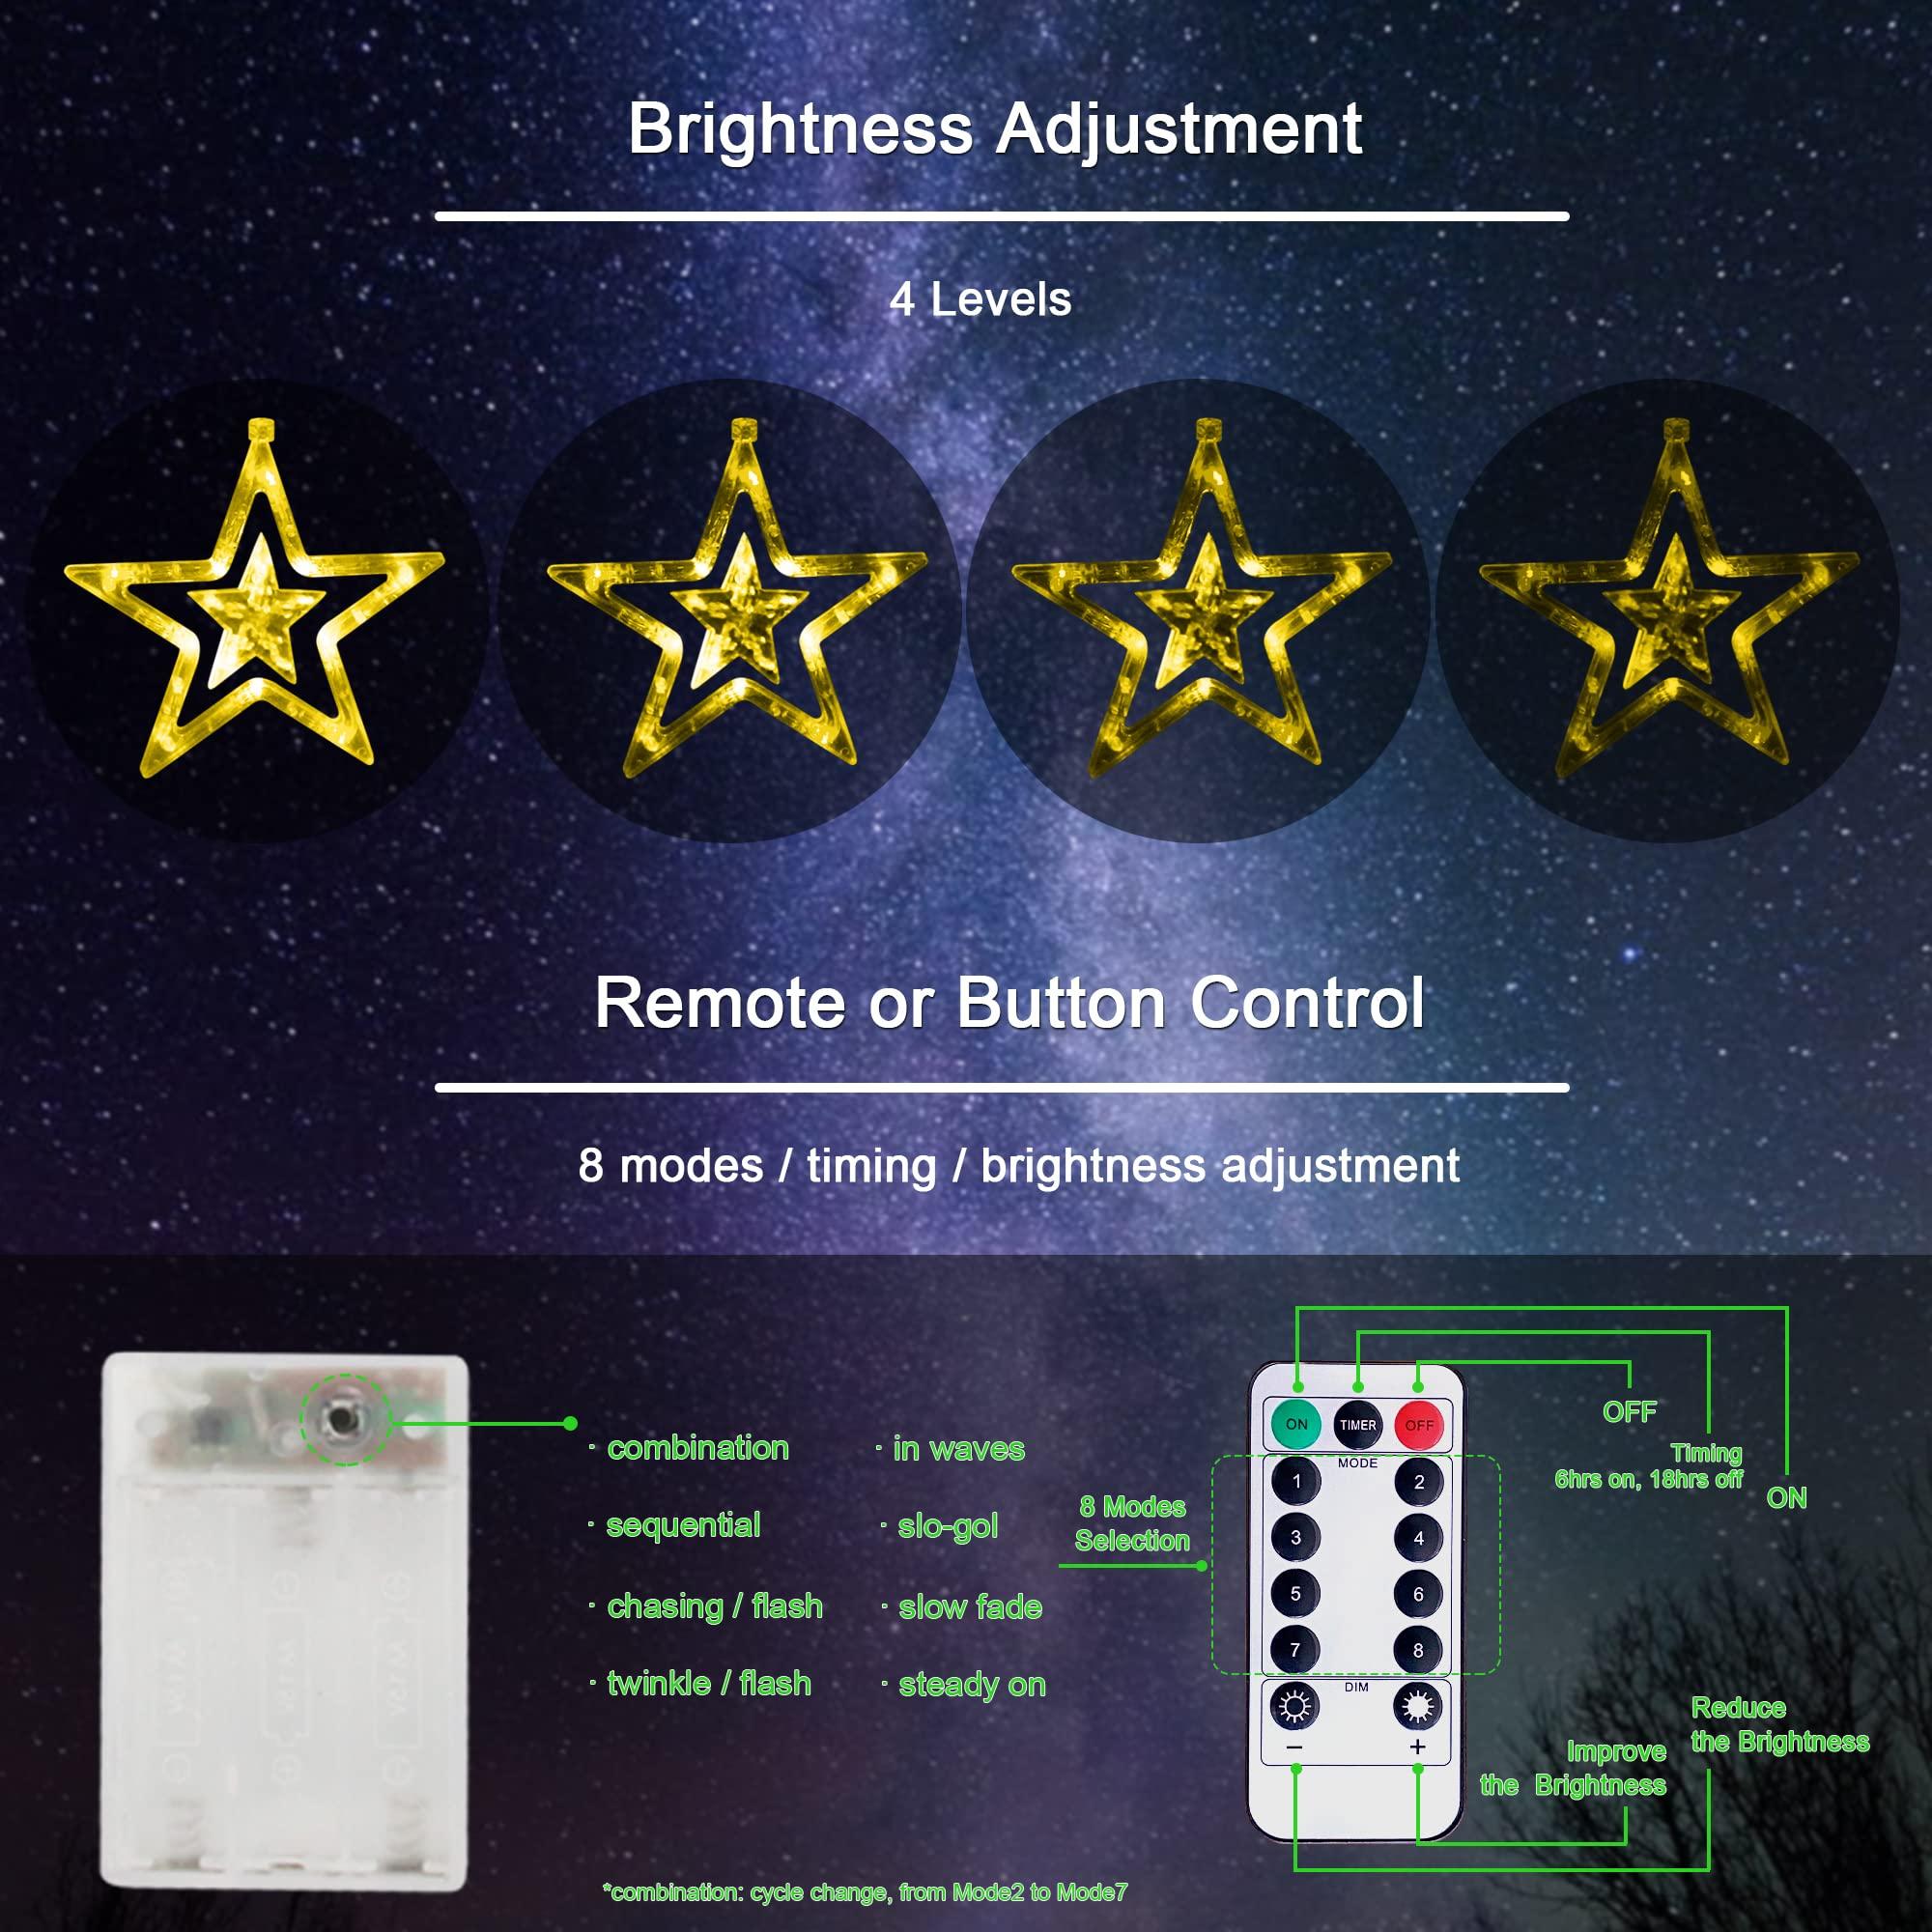 12 Star Curtain Lights with Remote Control 138 LEDs Fairy Light 8 Lighting Modes USB Powered for Bedroom Garden Party Wedding Christmas, Ideale Gift for Family Friends (Warm White) 4